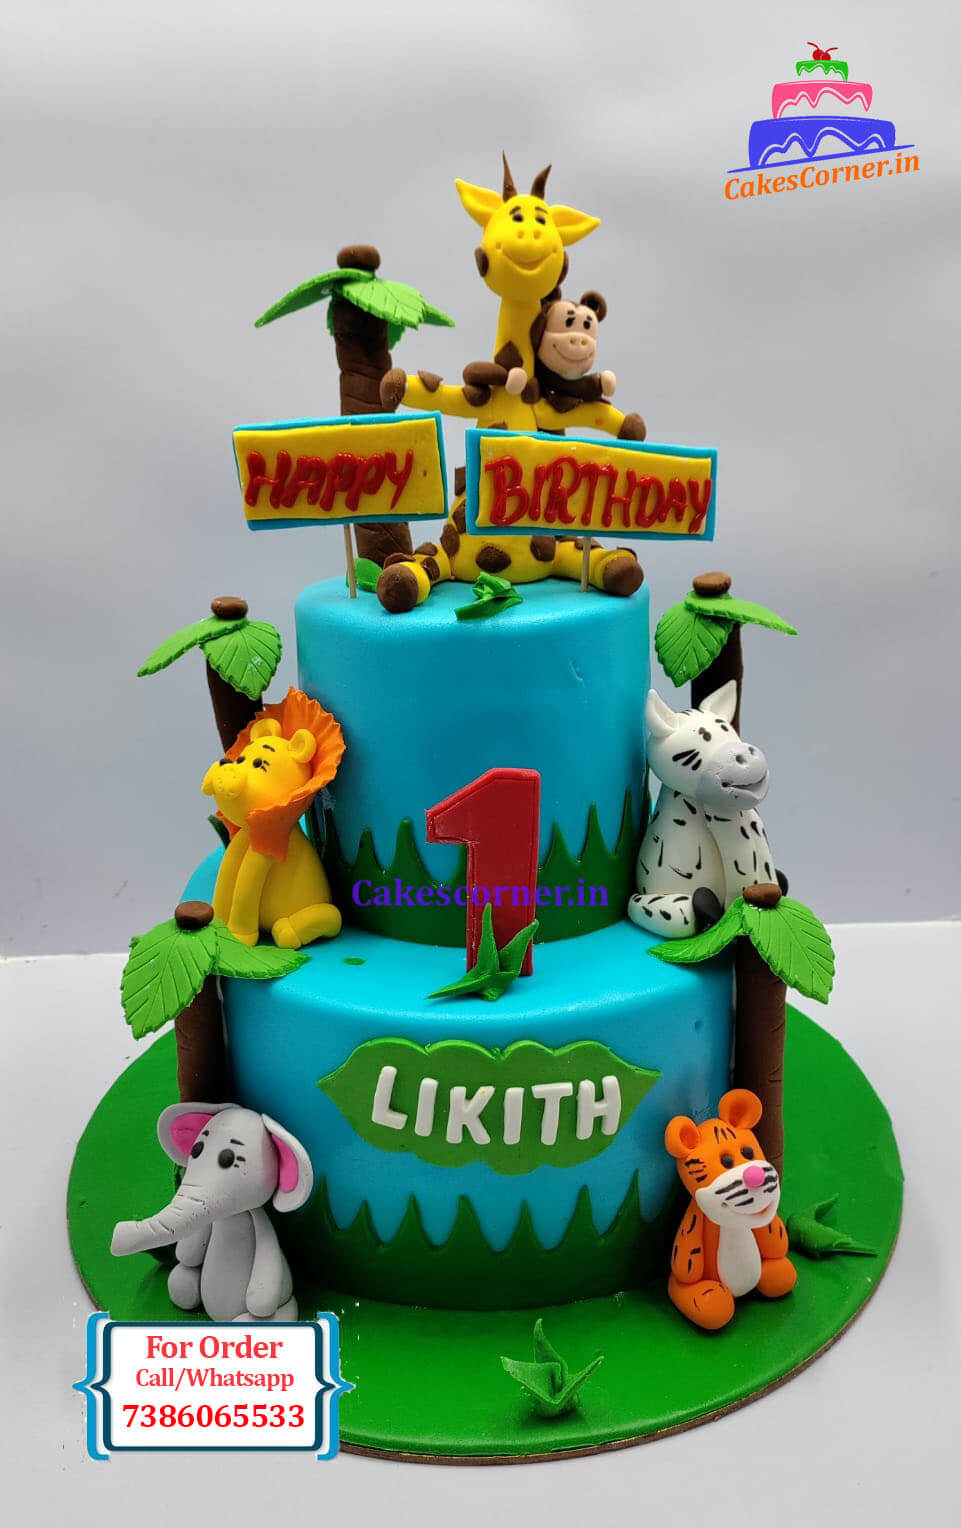 Step Cakes Archives - Customized Cakes Online Hyderabad | Online Cake  Delivery | Cakes Corner